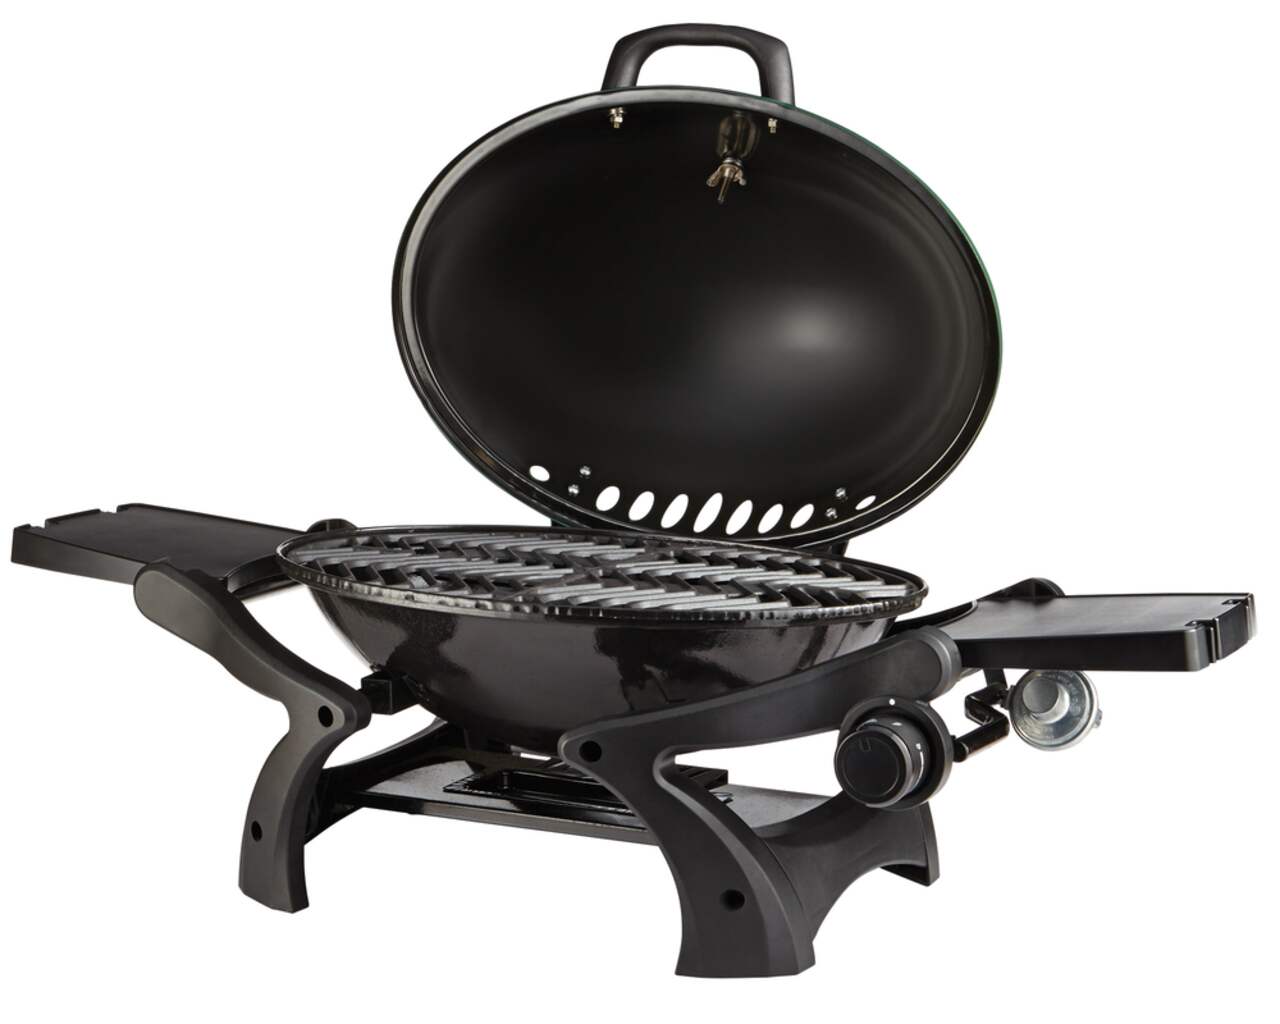 https://media-www.canadiantire.ca/product/seasonal-gardening/backyard-living/outdoor-cooking/0852203/woods-portable-gas-bbq-8cf3e8c6-56ec-4ba1-a9c8-6da33fe7b2f1.png?imdensity=1&imwidth=640&impolicy=mZoom